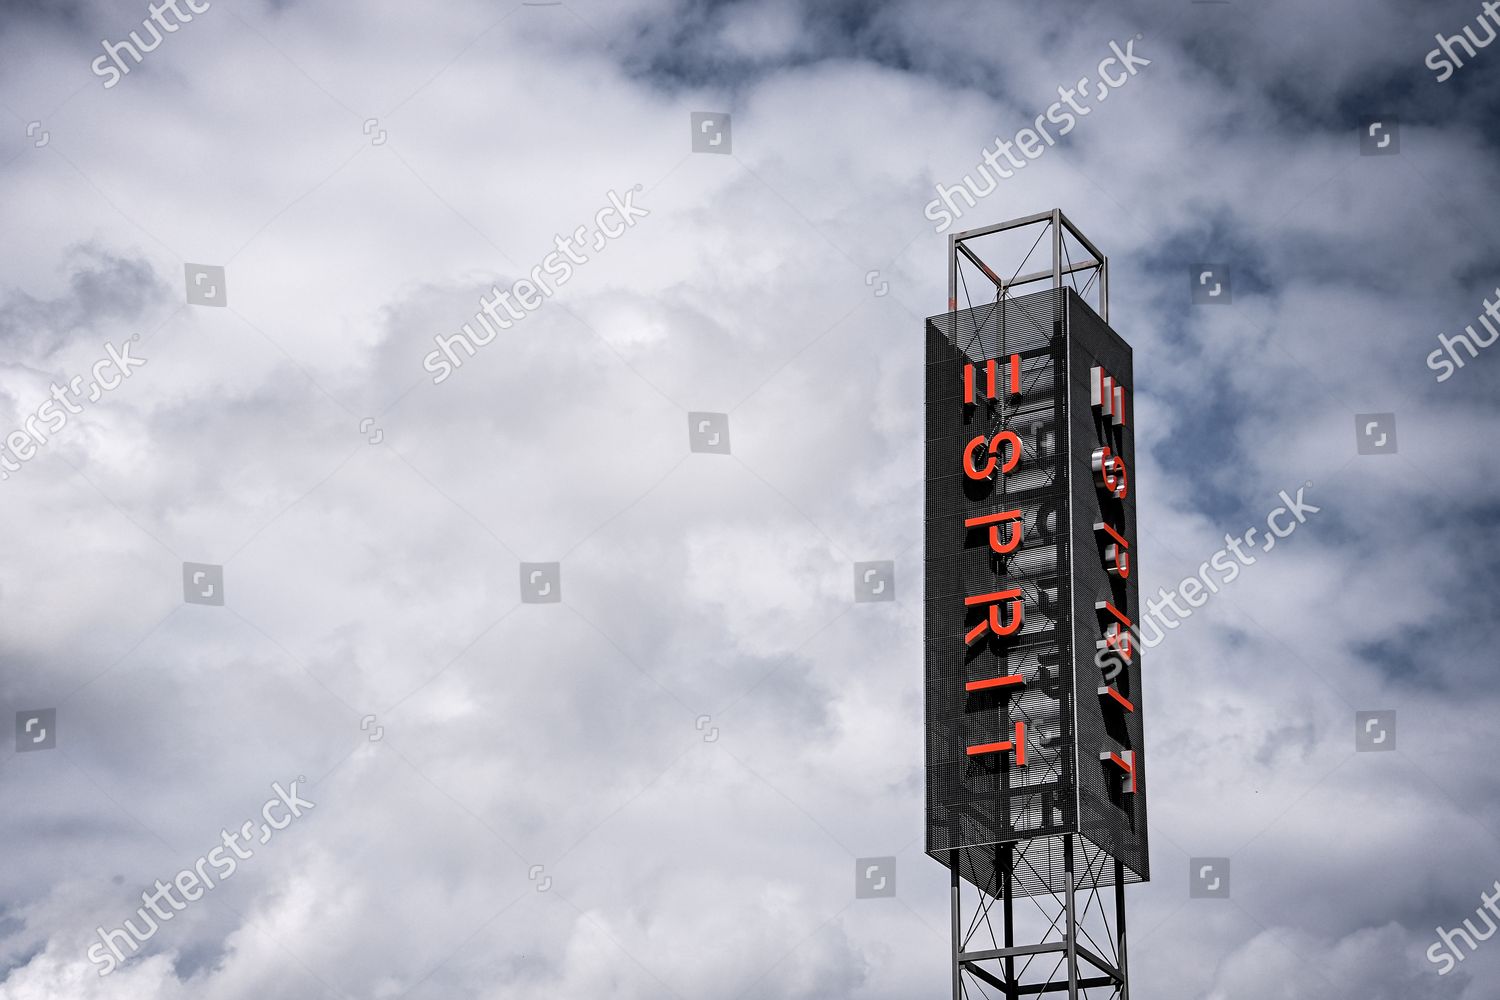 Logo Esprit Fashion Chain Companys Outlet Store Editorial Stock Photo Stock Image Shutterstock